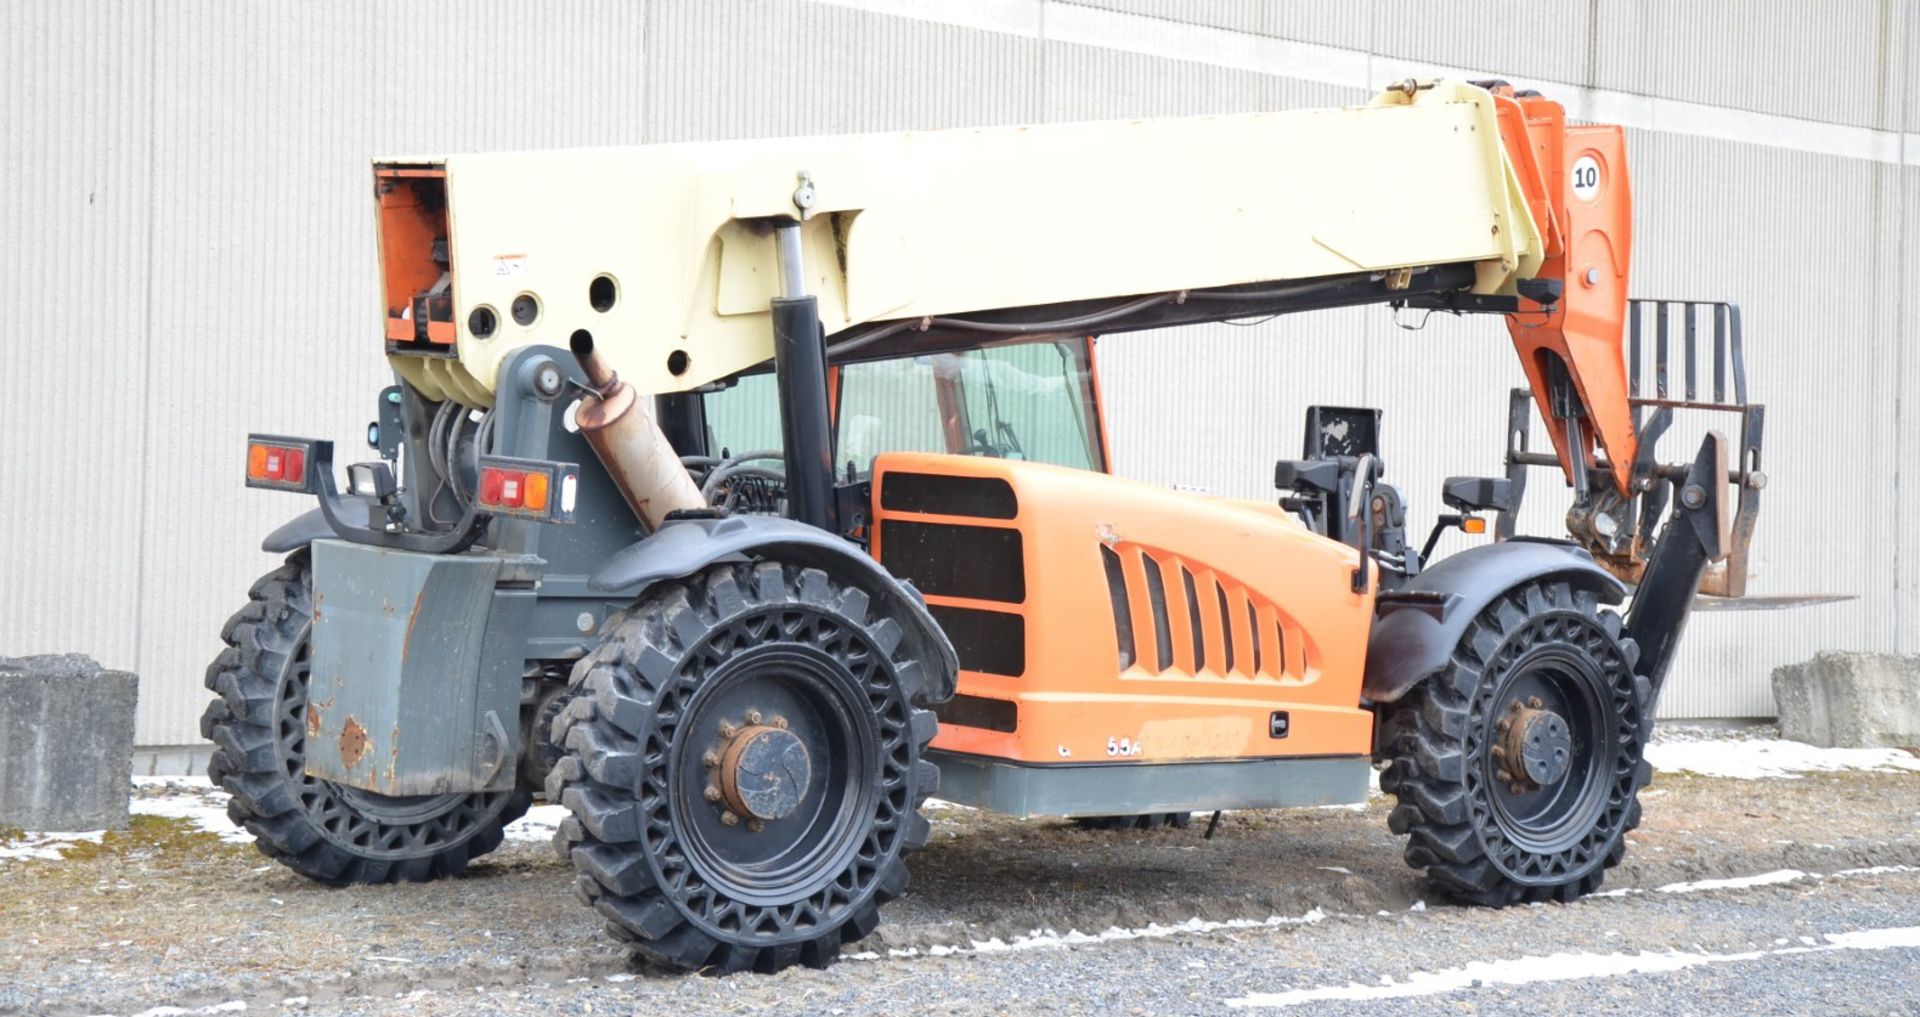 JLG (2011) G10-55A 10,000 LBS. CAPACITY DIESEL TELEHANDLER FORKLIFT WITH 56' MAX VERTICAL LIFT, - Image 21 of 23